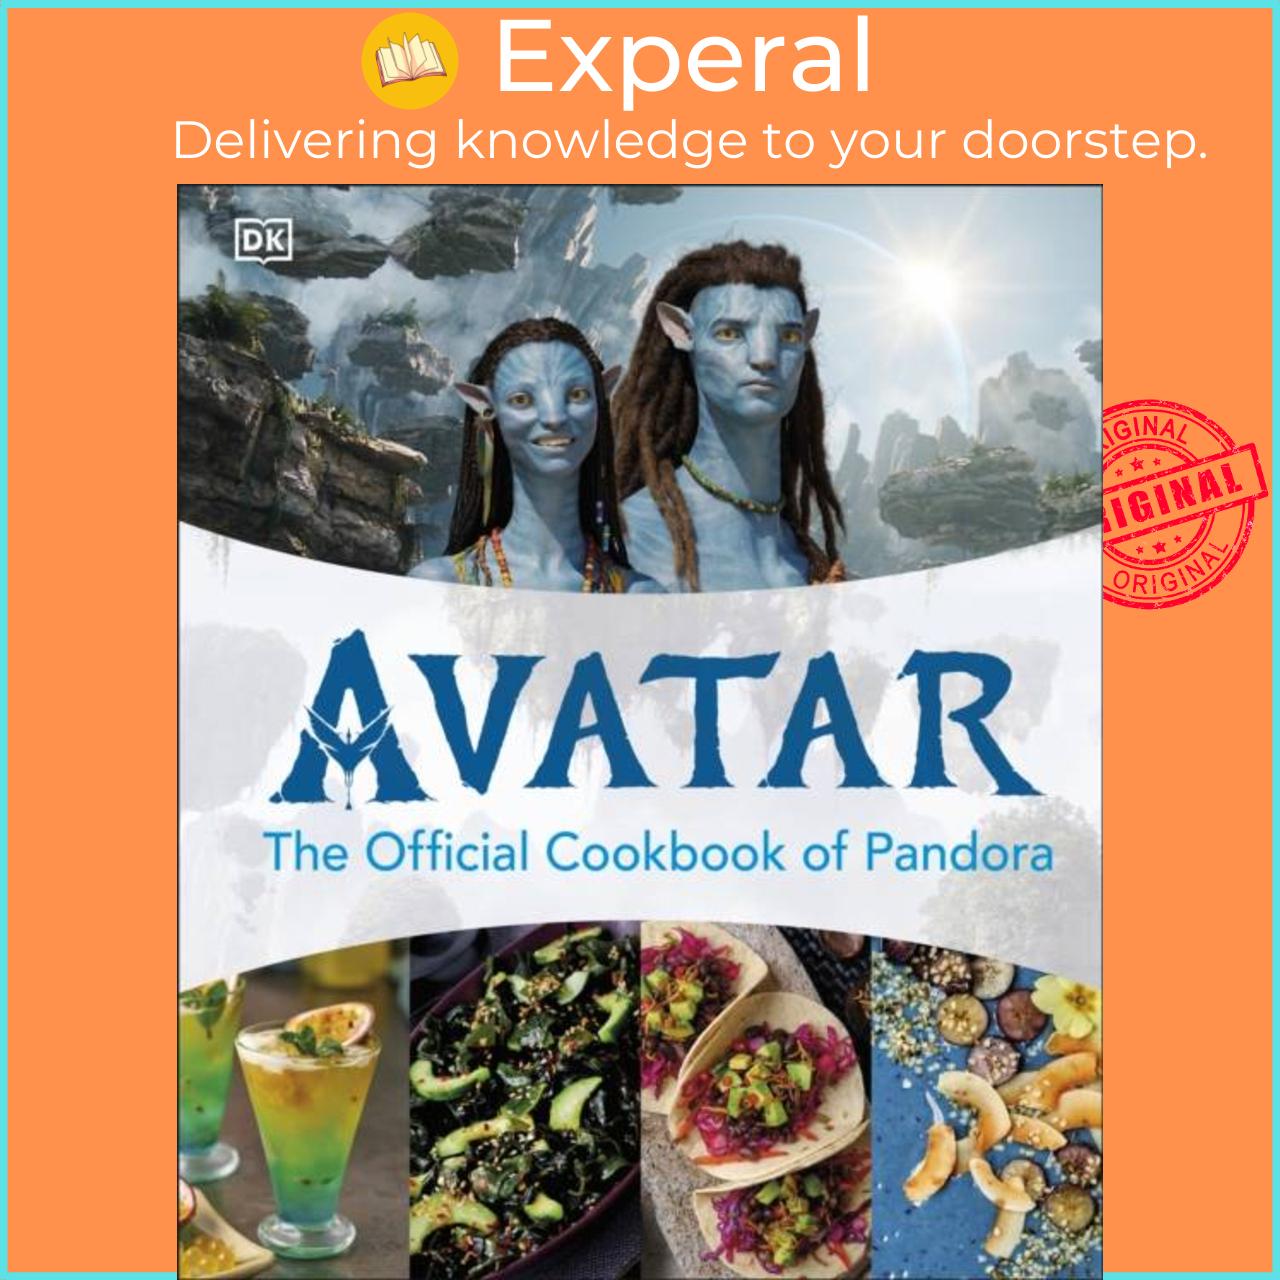 Sách - Avatar The Official Cookbook of Pandora by DK (UK edition, hardcover)